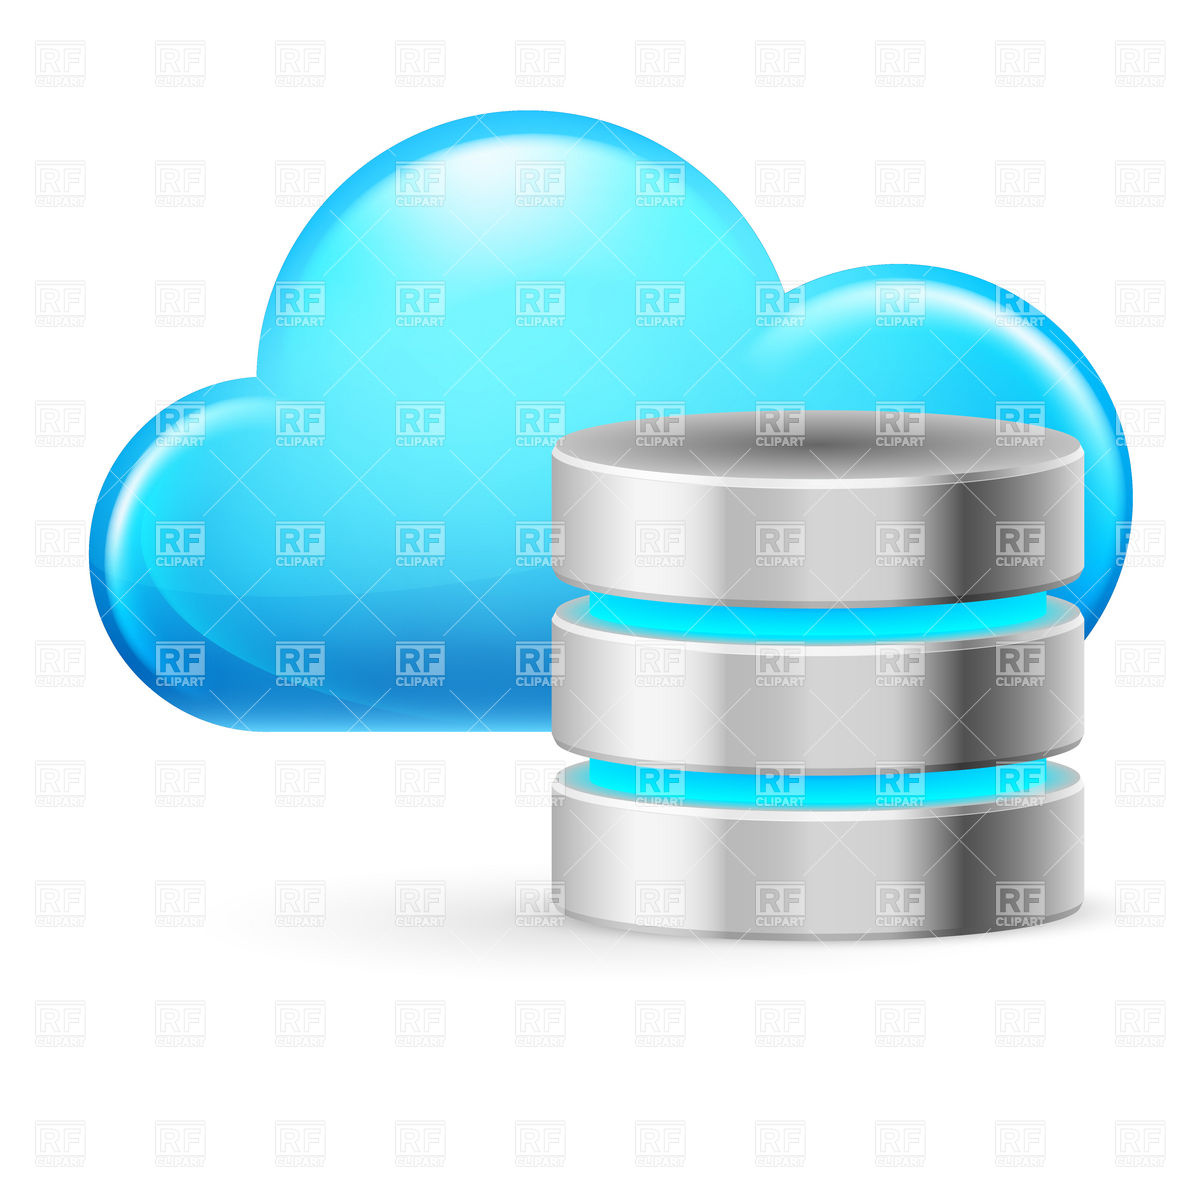 Cloud Computing Icon With Symbolic Database 9172 Icons And Emblems